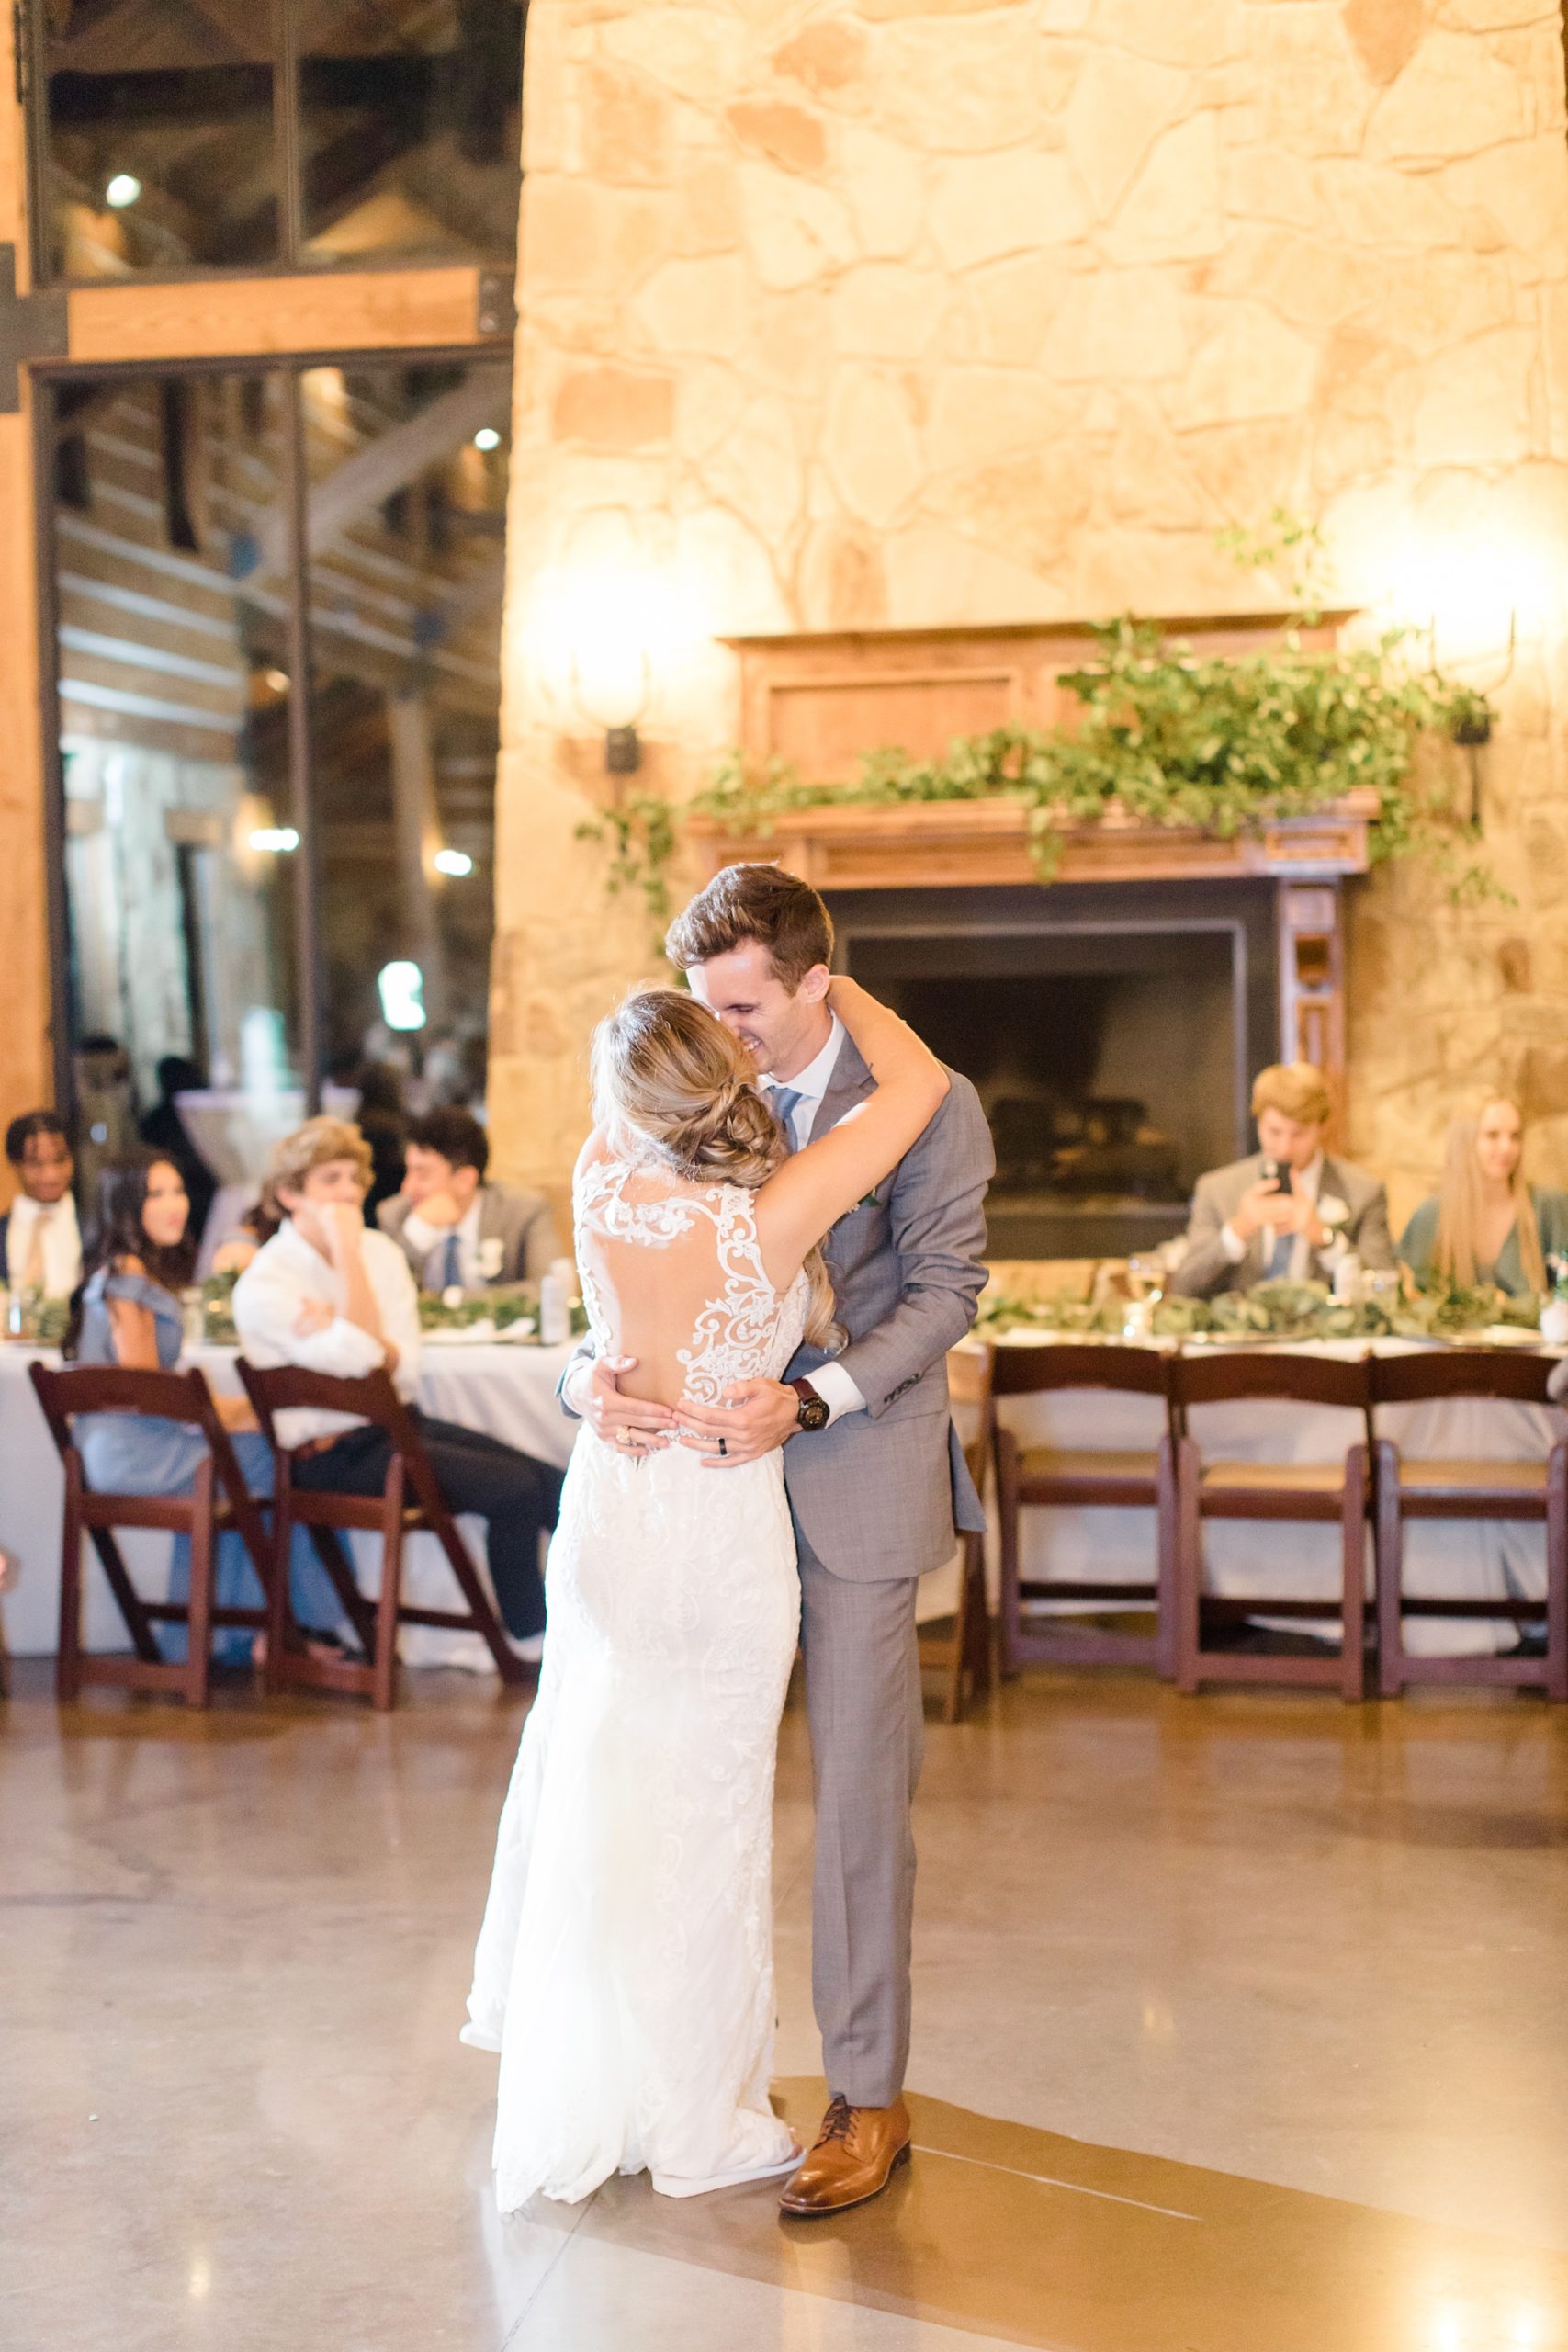 newlyweds dance together during The Lodge Wedding reception